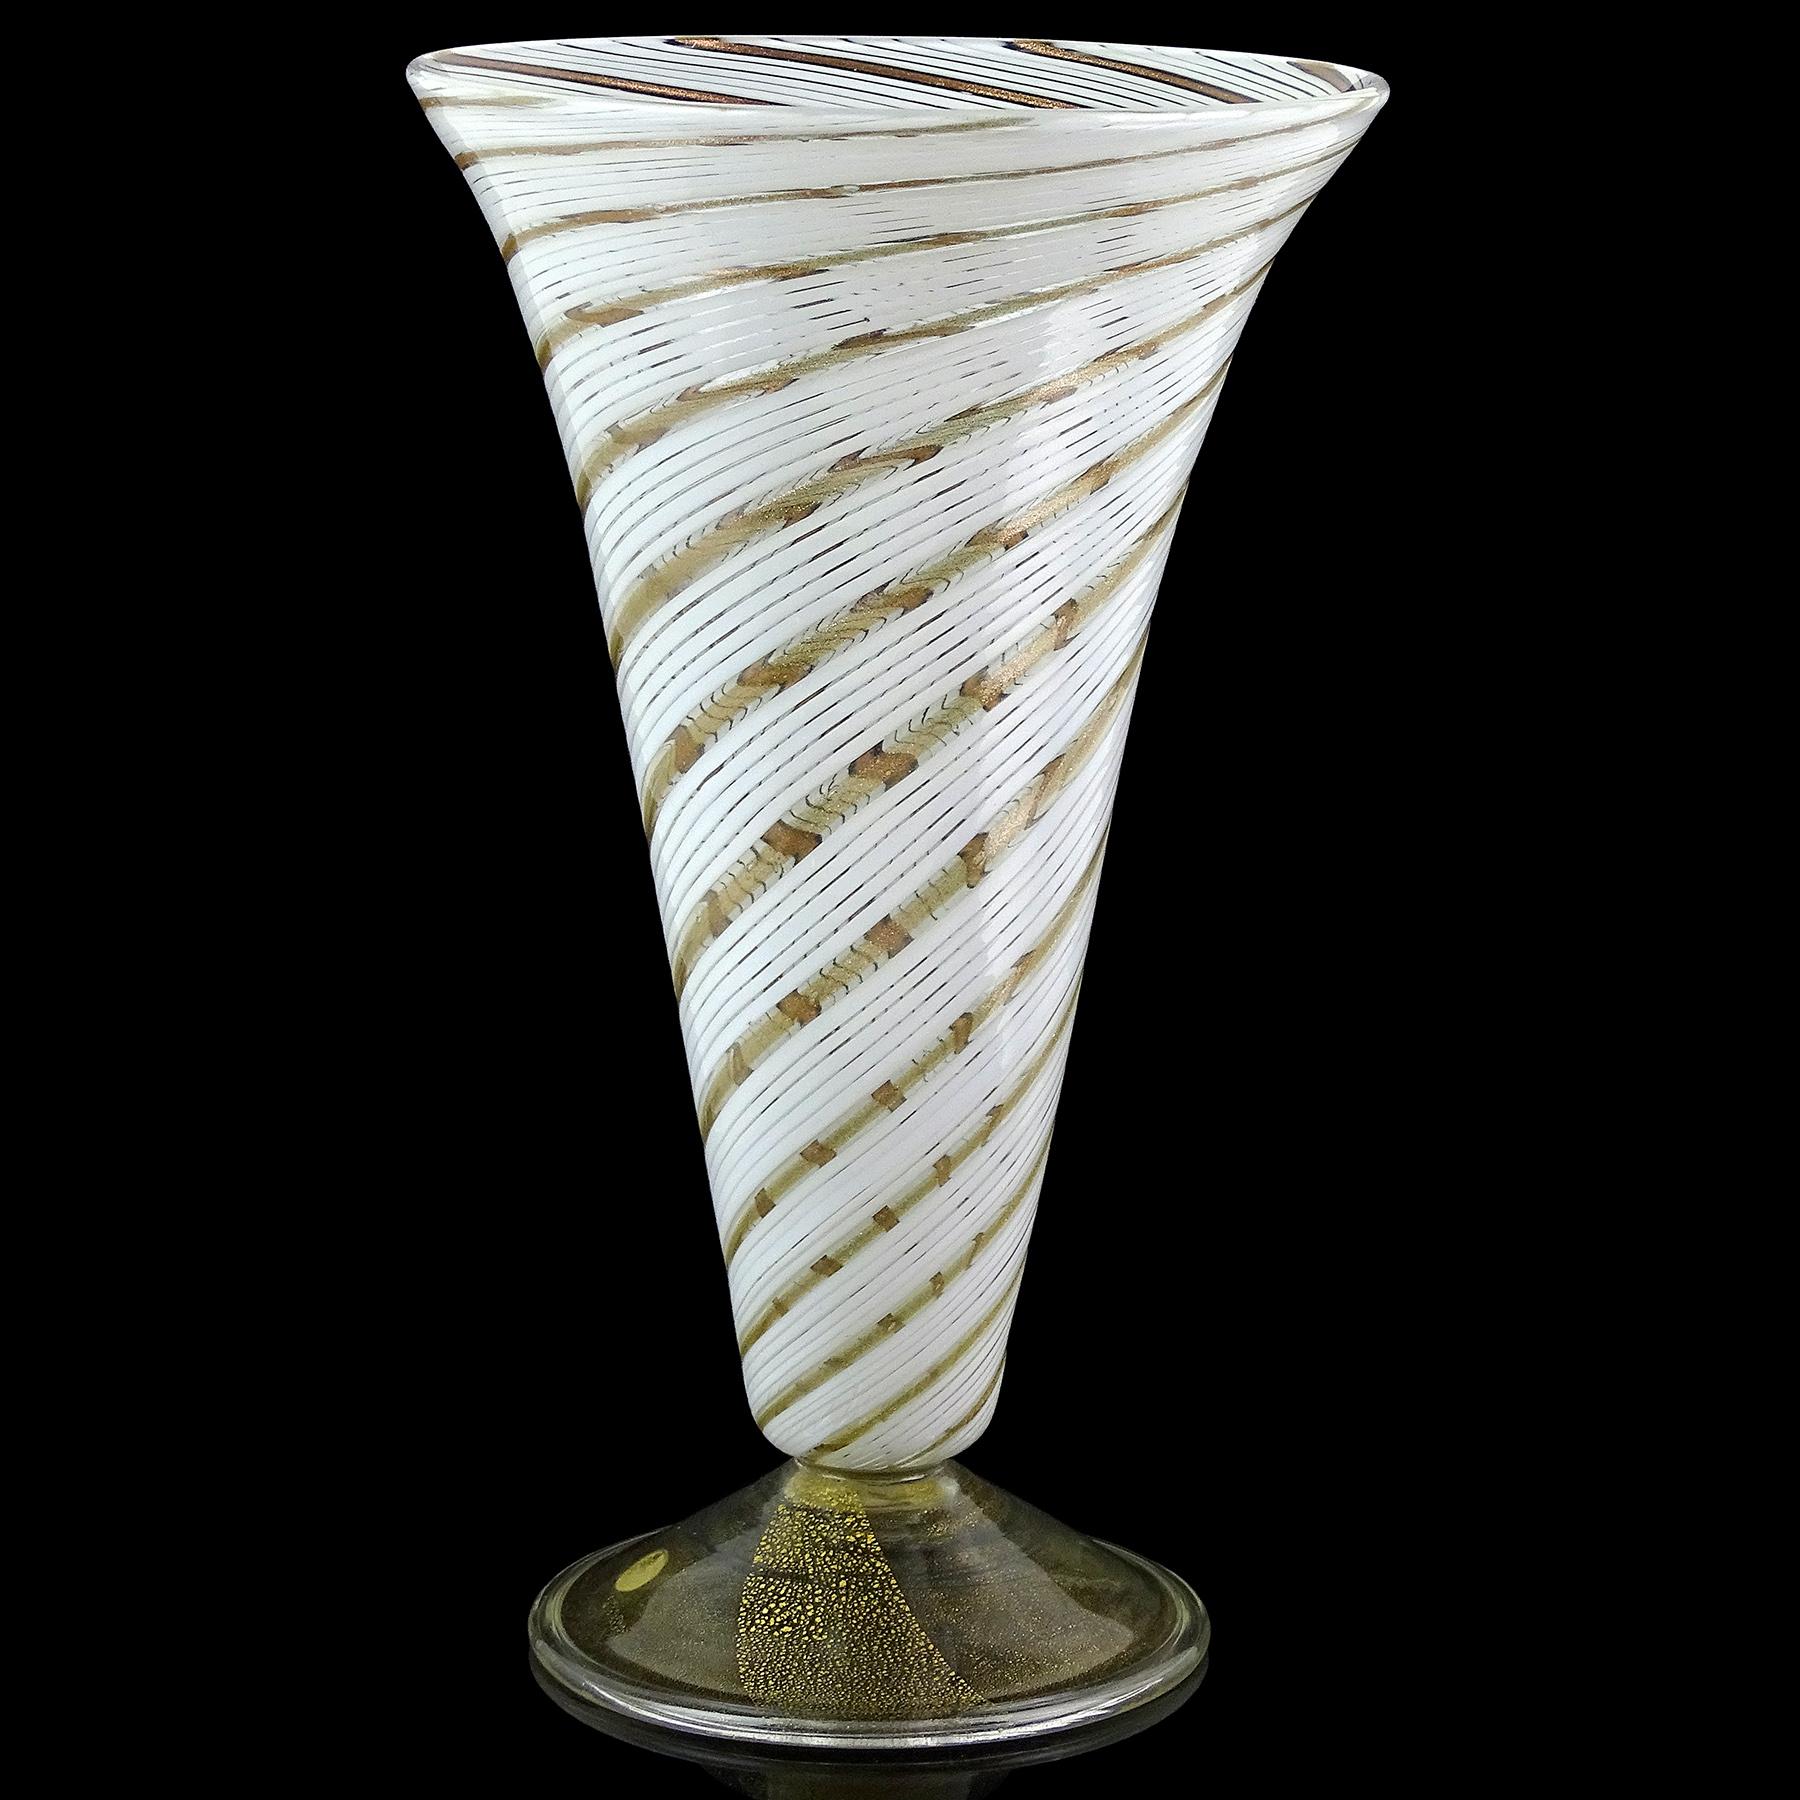 Beautiful vintage Murano hand blown swirling white and aventurine flecks Italian art glass footed flower vase. Atrtibuted to Arte Vetraria Muranese (A.Ve.M.) company, and in the style of designer Dino Martens. The vase is created in the “Mezza